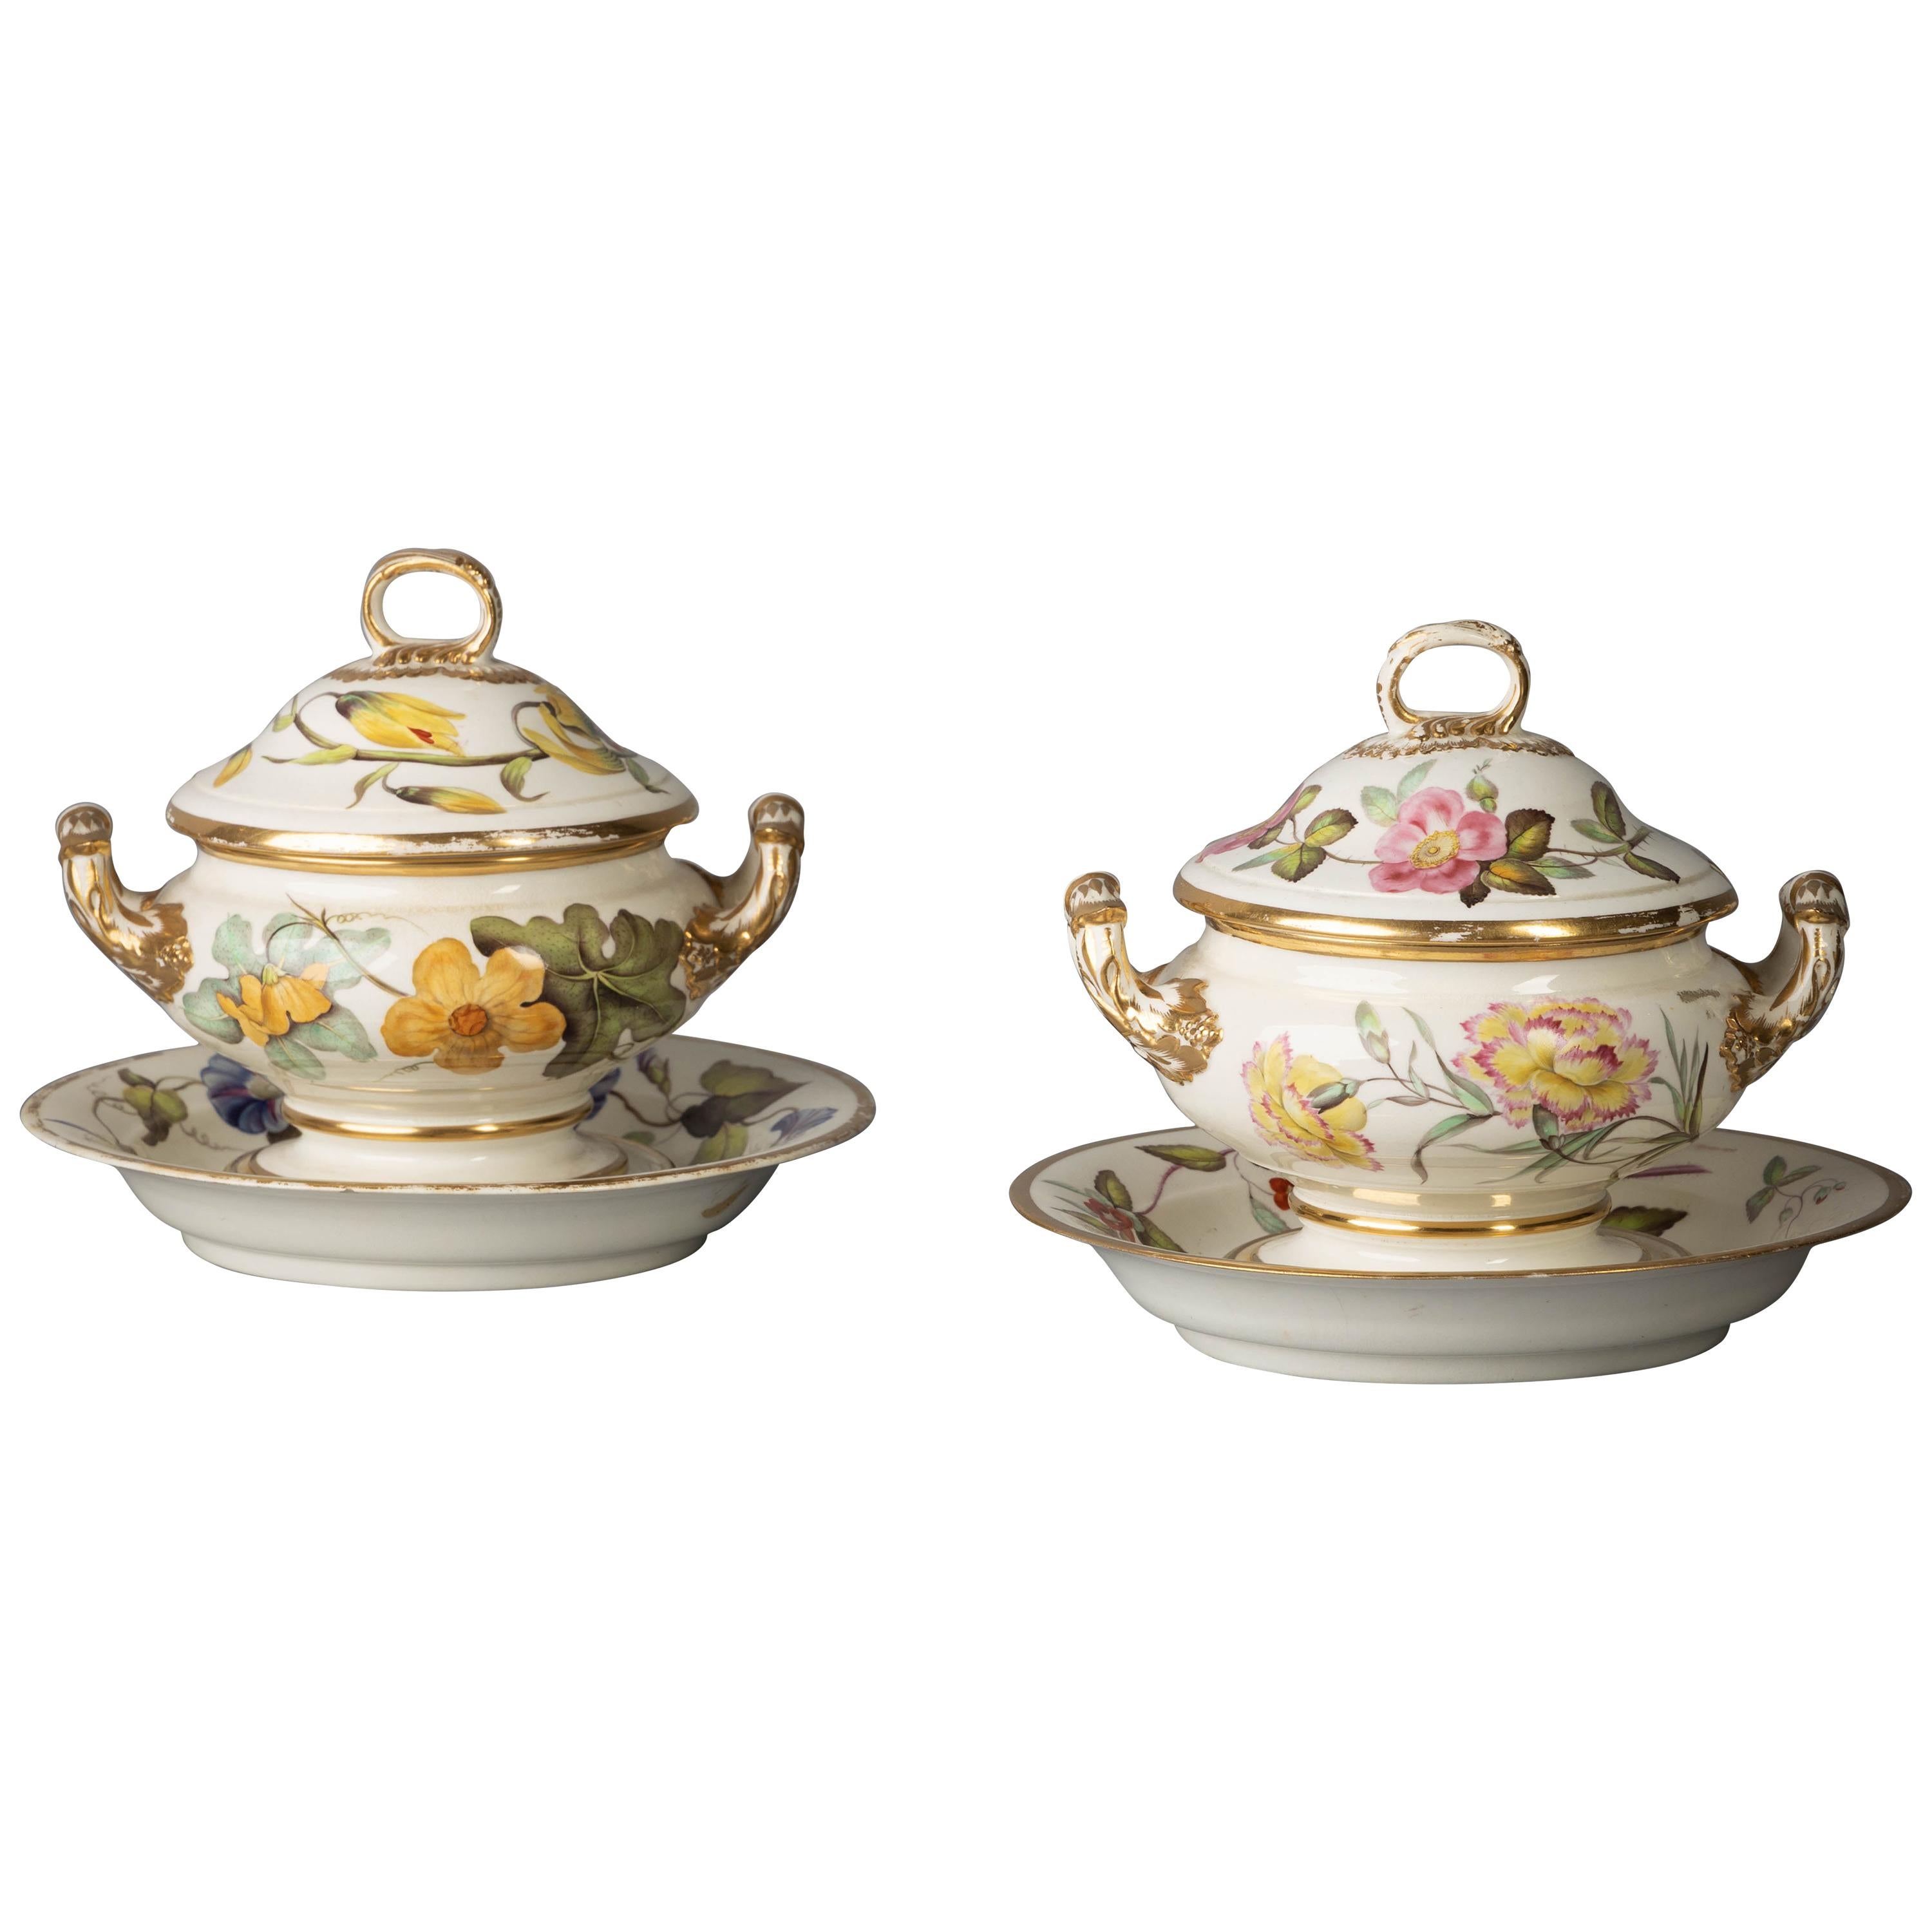 Pair of English Porcelain Botanical Sauce Tureens on Stands, Derby, circa 1820